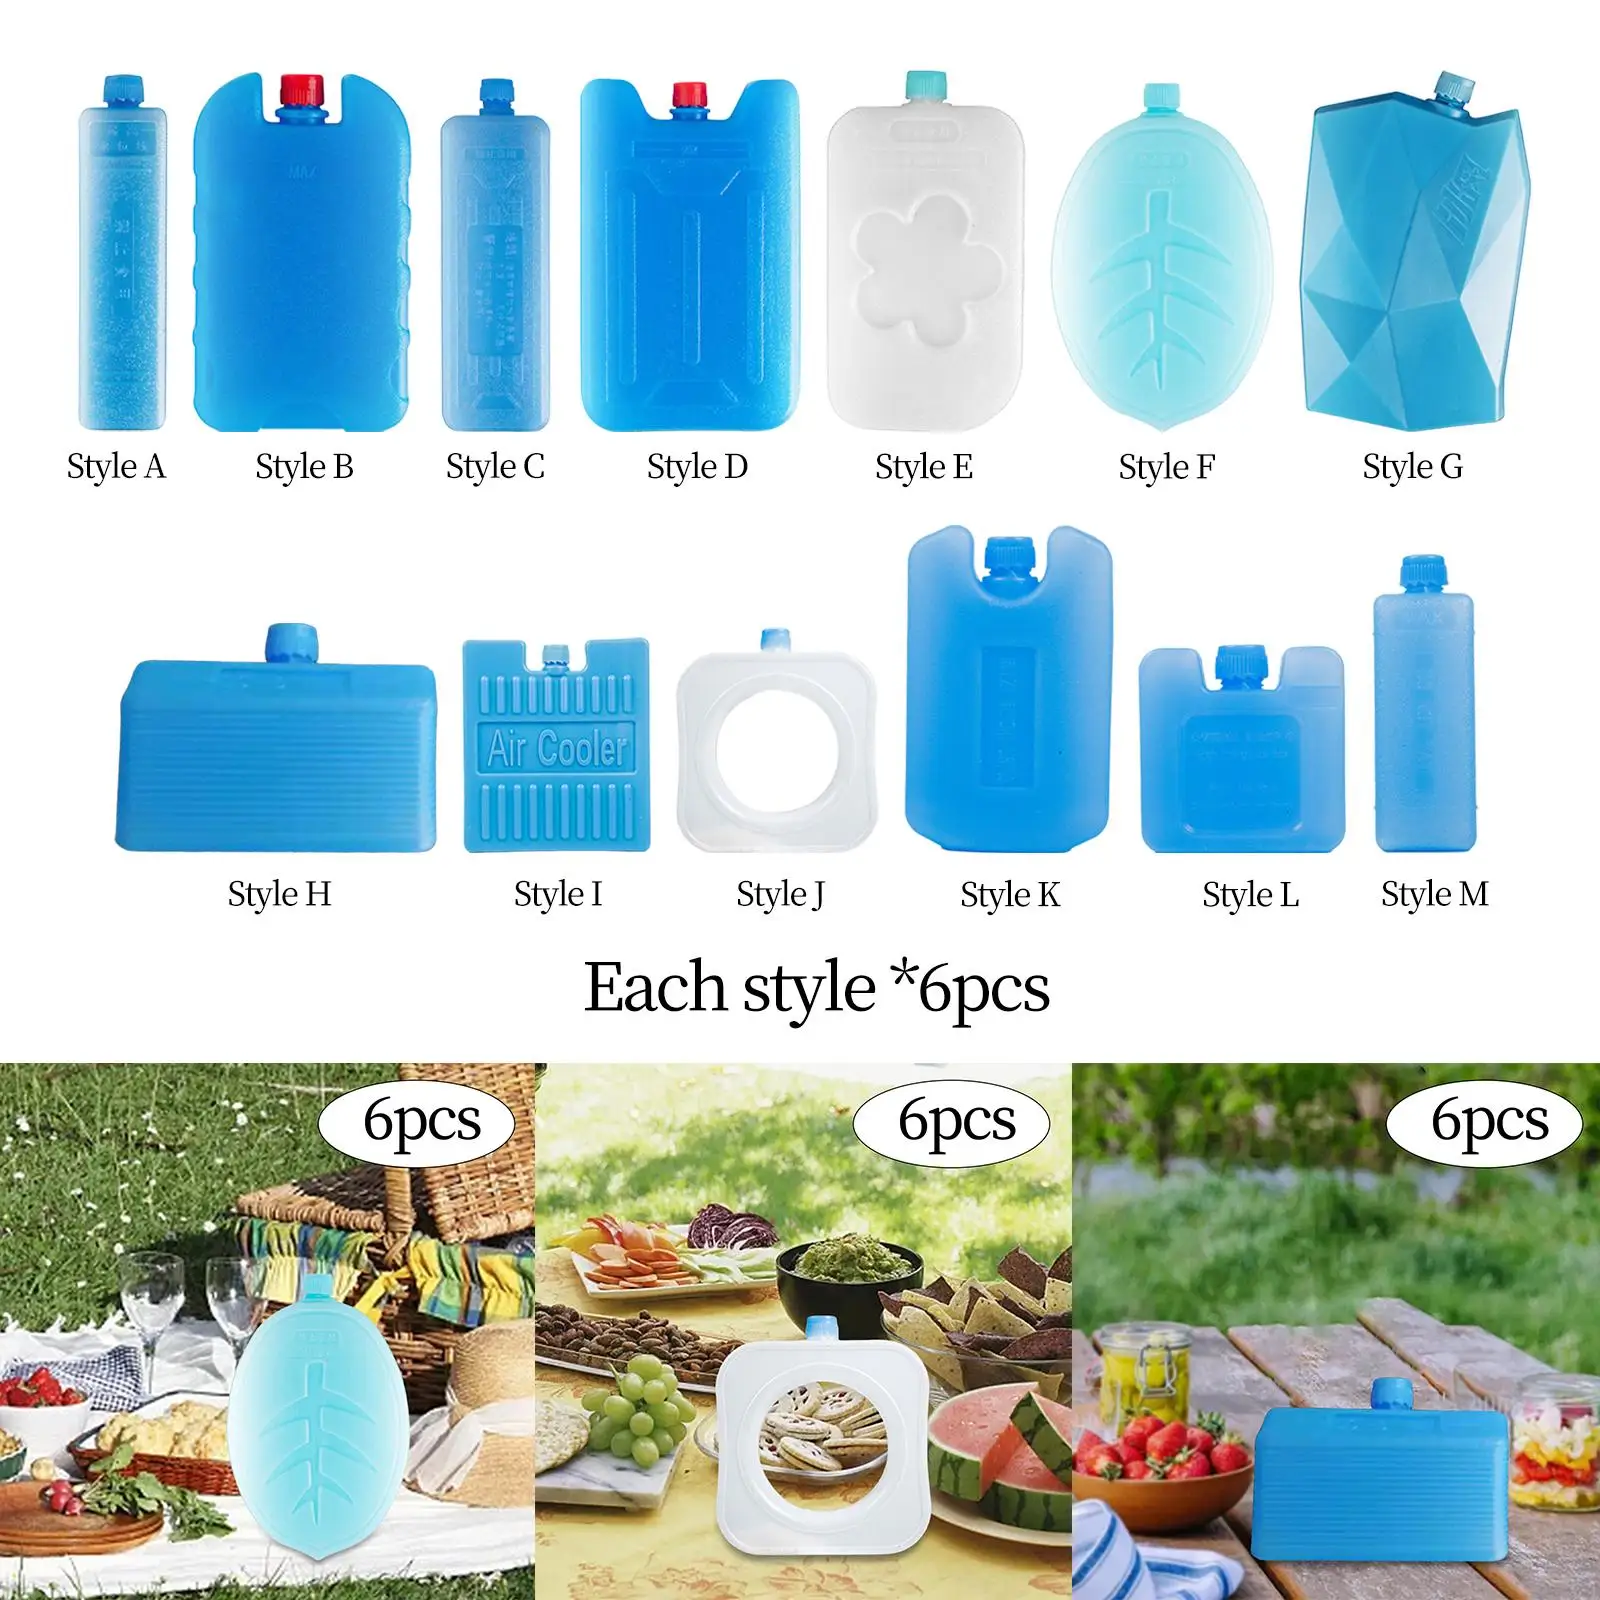 6x Ice Freezer Blocks that Simply Stays Frozen for Longer for Travel Cool Box Cooling Ice Packs Ice Cooler Blocks for Picnic BBQ